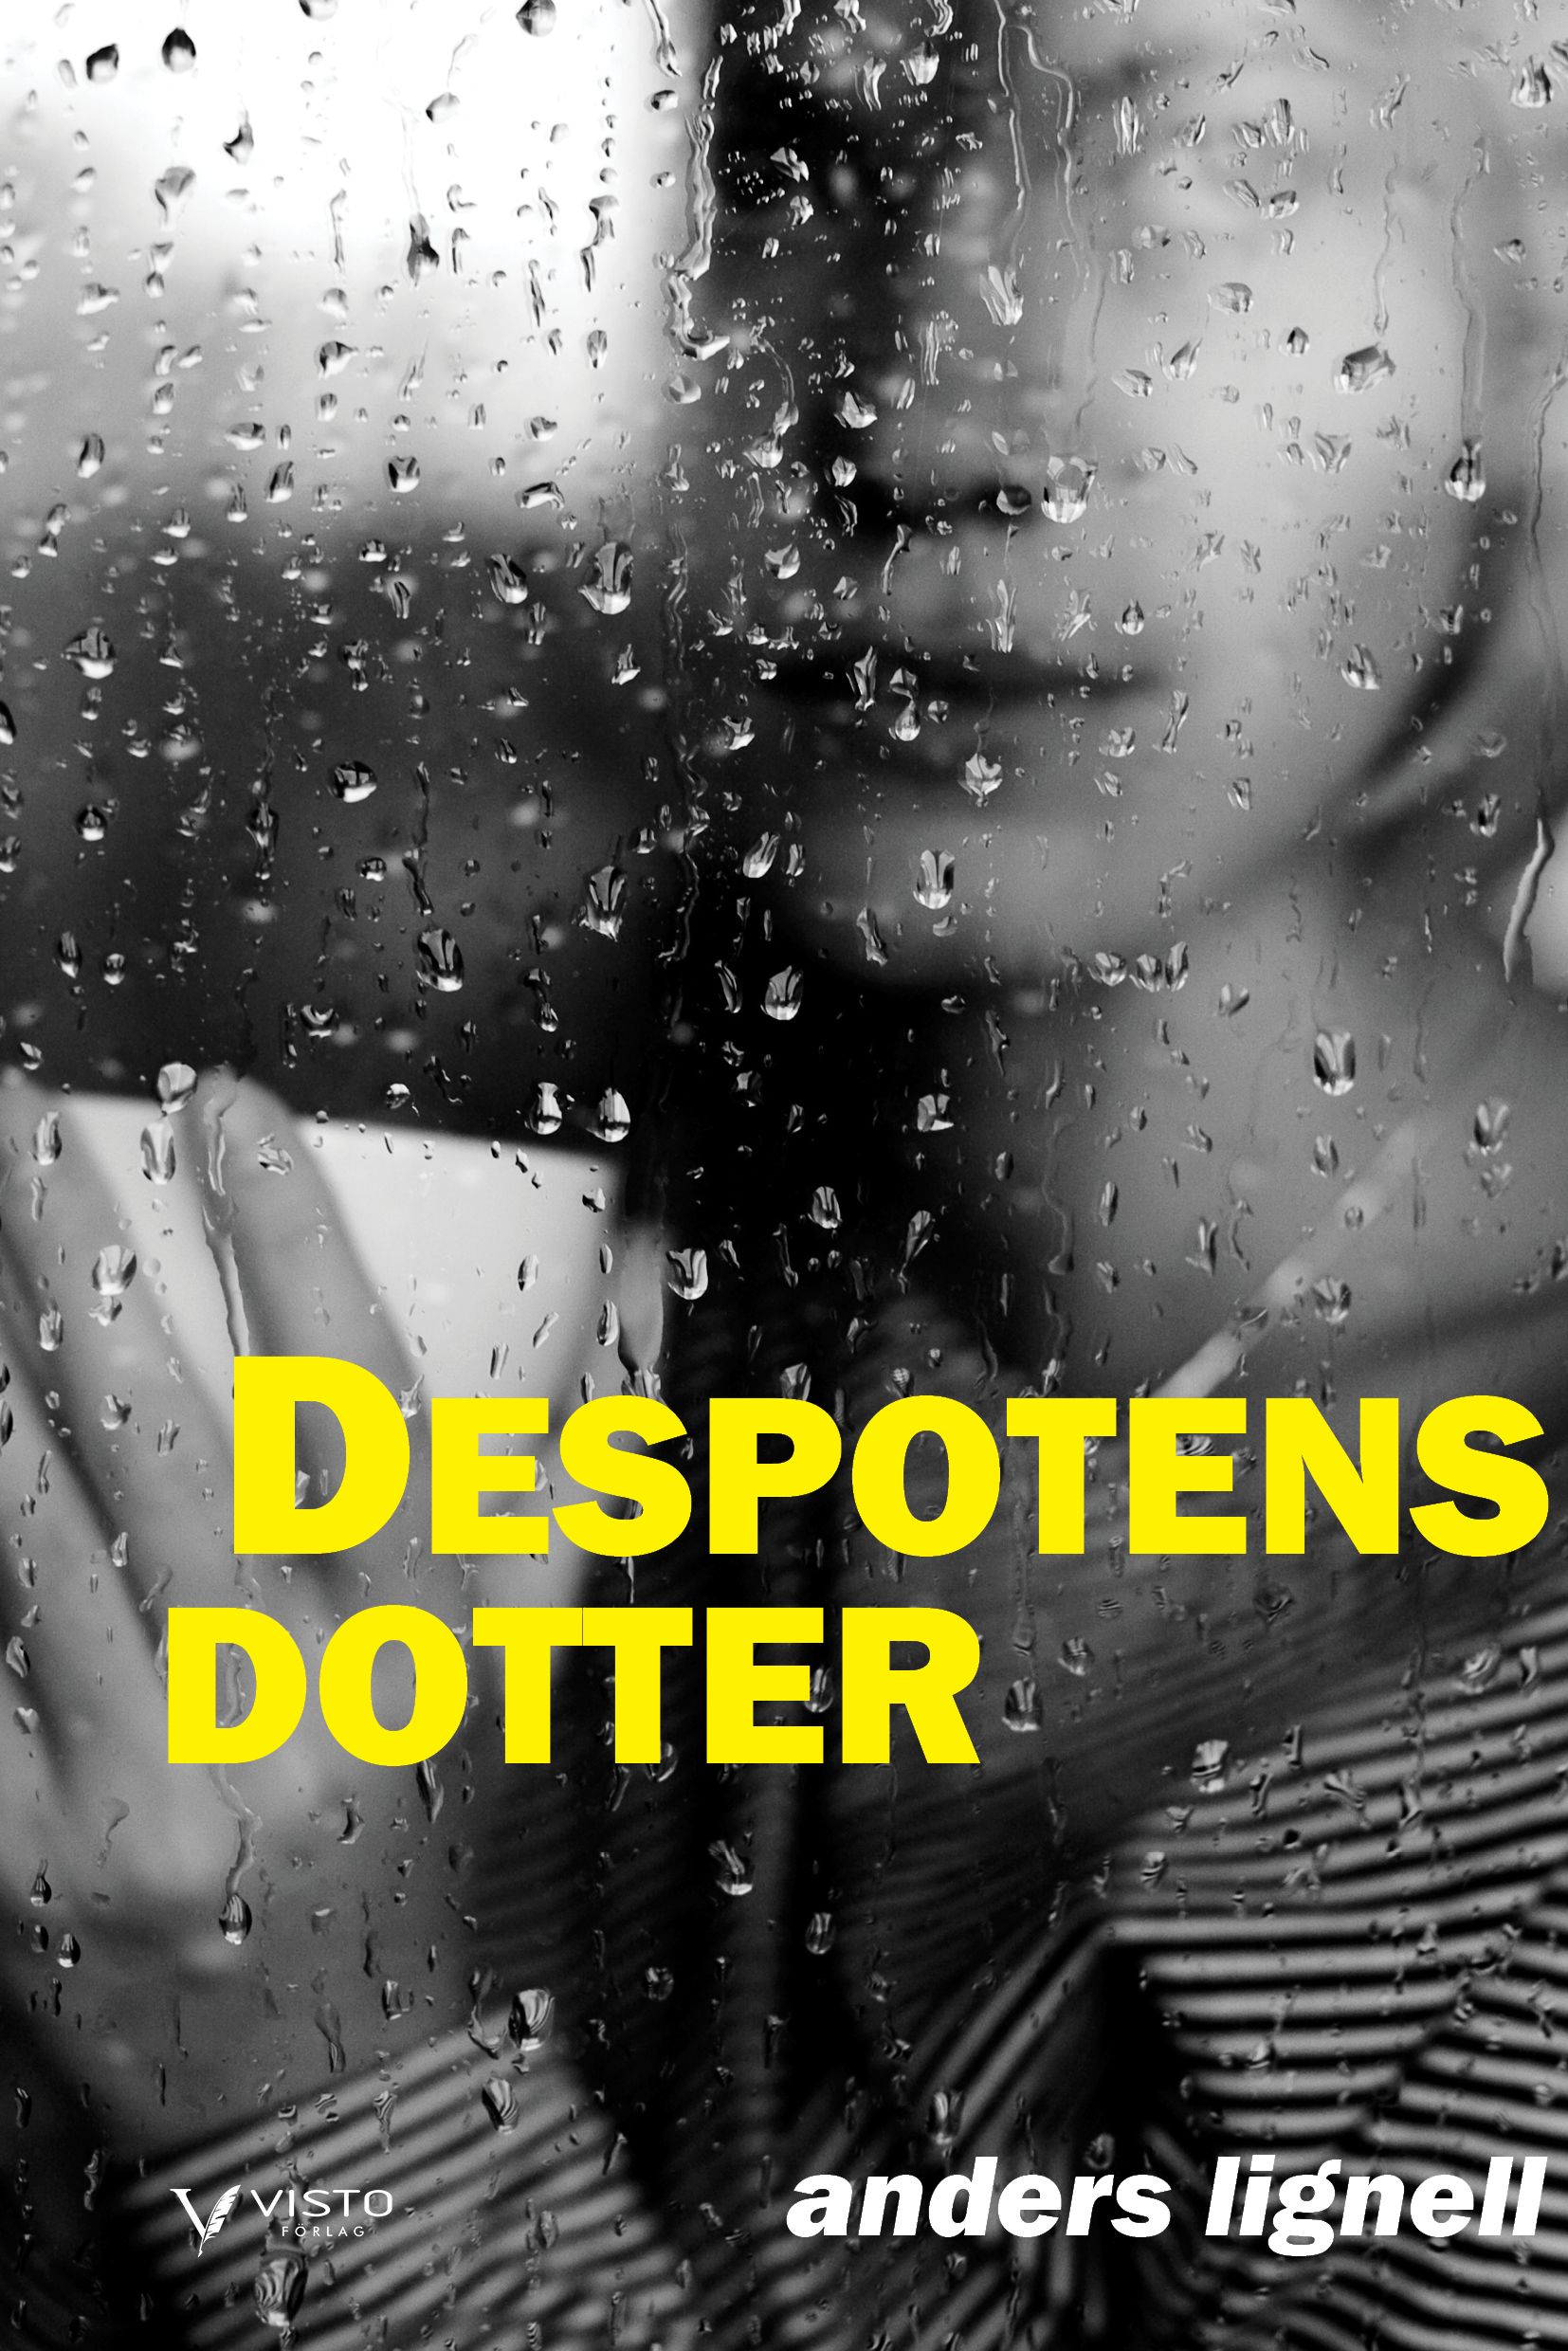 Despotens dotter, eBook by Anders Lignell